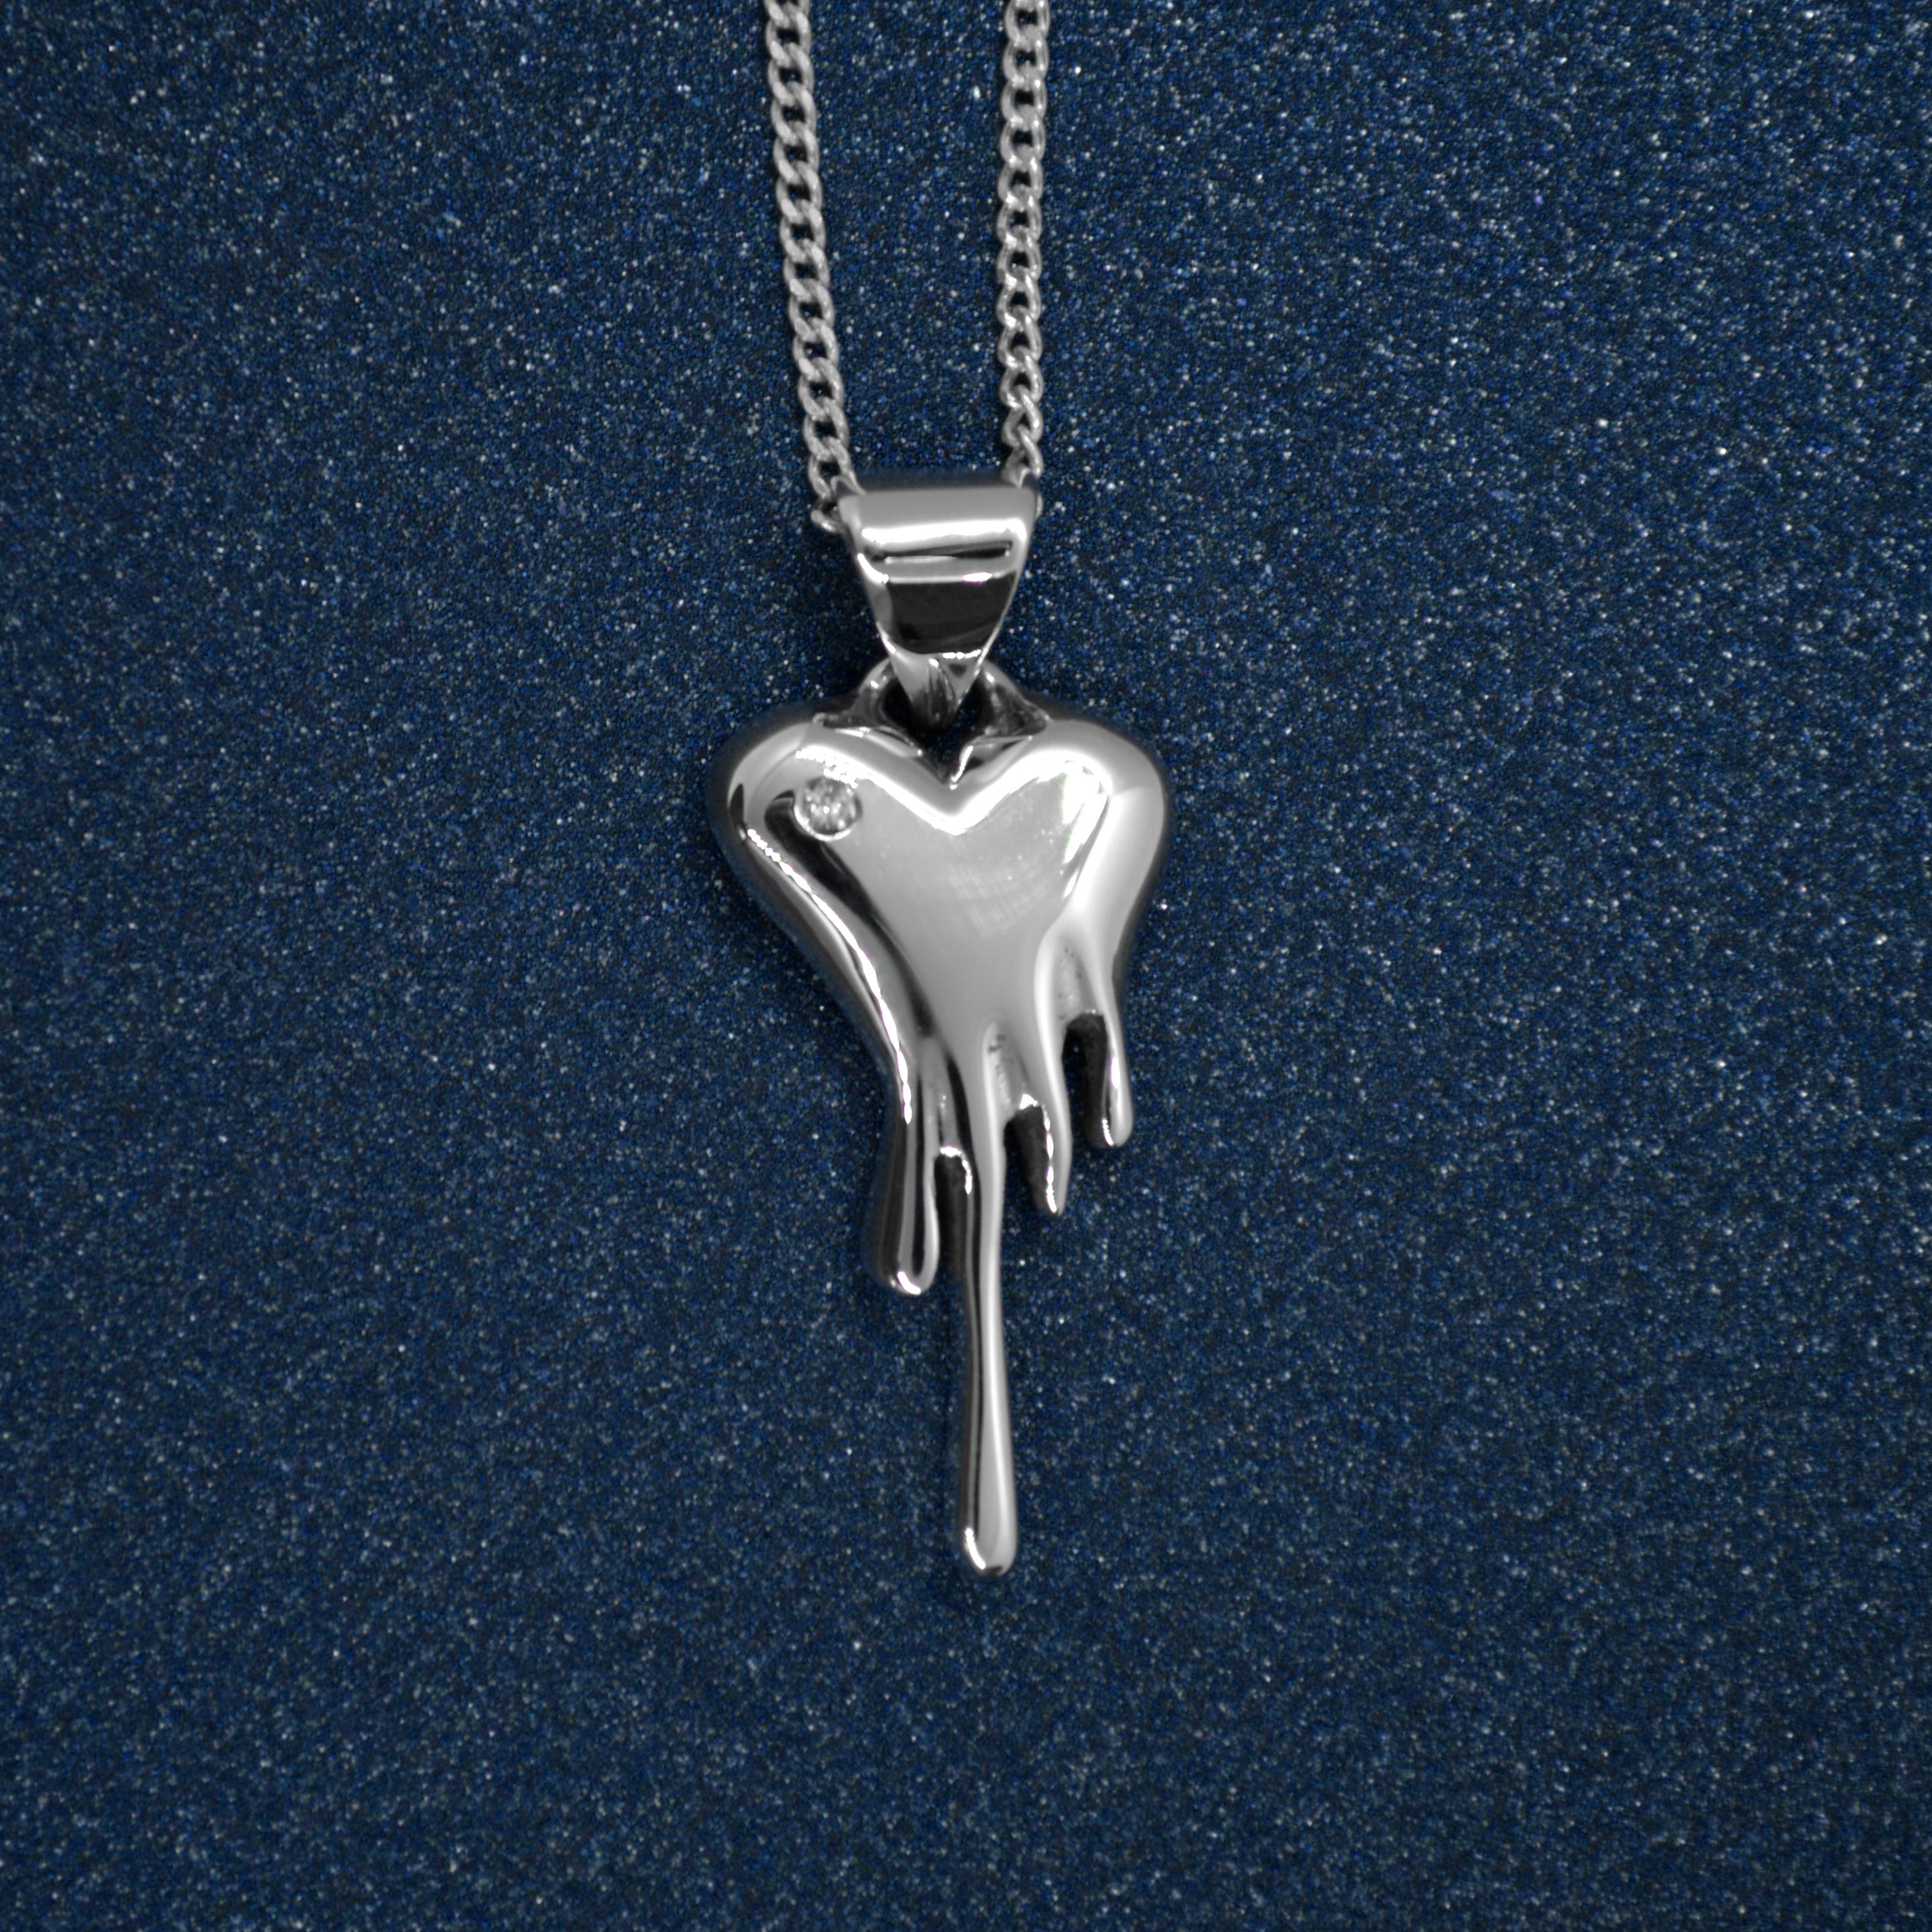 Made to order mini Bloody Heart Necklace, featuring a diamond, includes pendant and chain.

Our signature piece with a sparkle.

Made in Sterling Silver
Featuring a diamond .02 carat, 1.5 mm diameter
Dimensions W14 mm x H20 mm
Chain length 20”
4